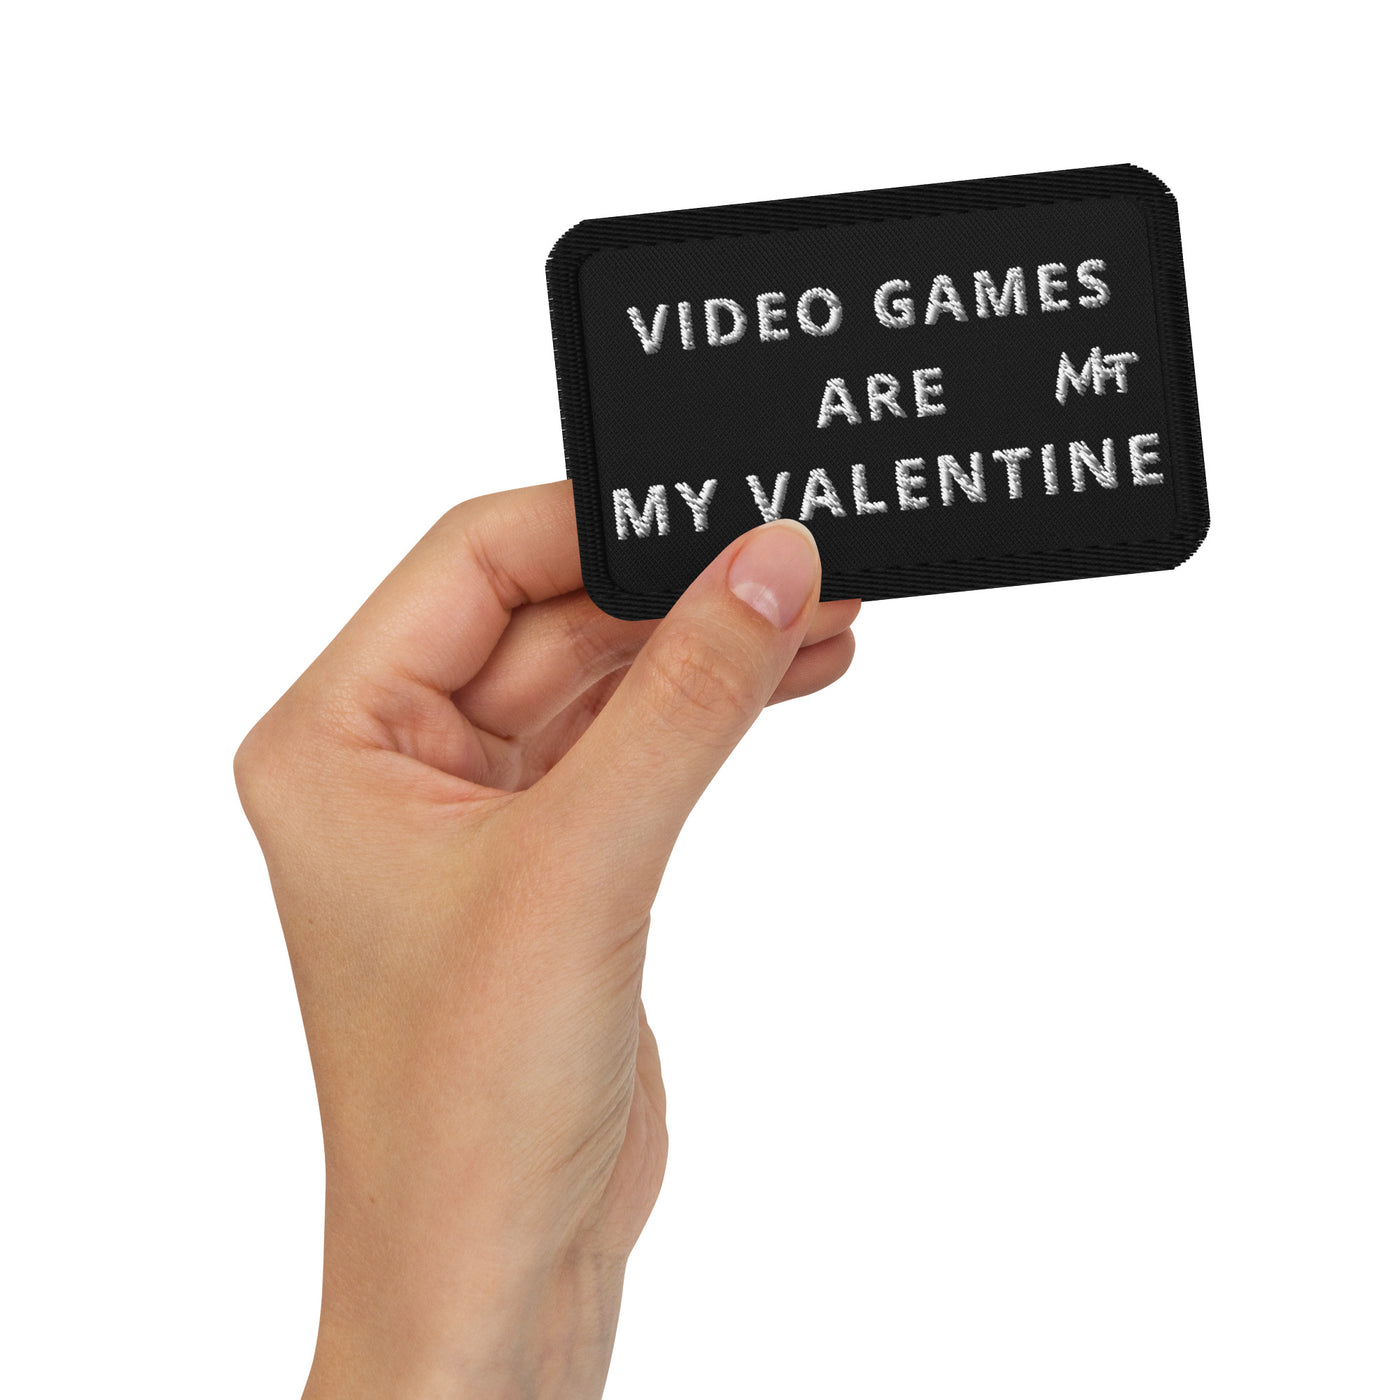 Video Games are My Valentine - Embroidered patches